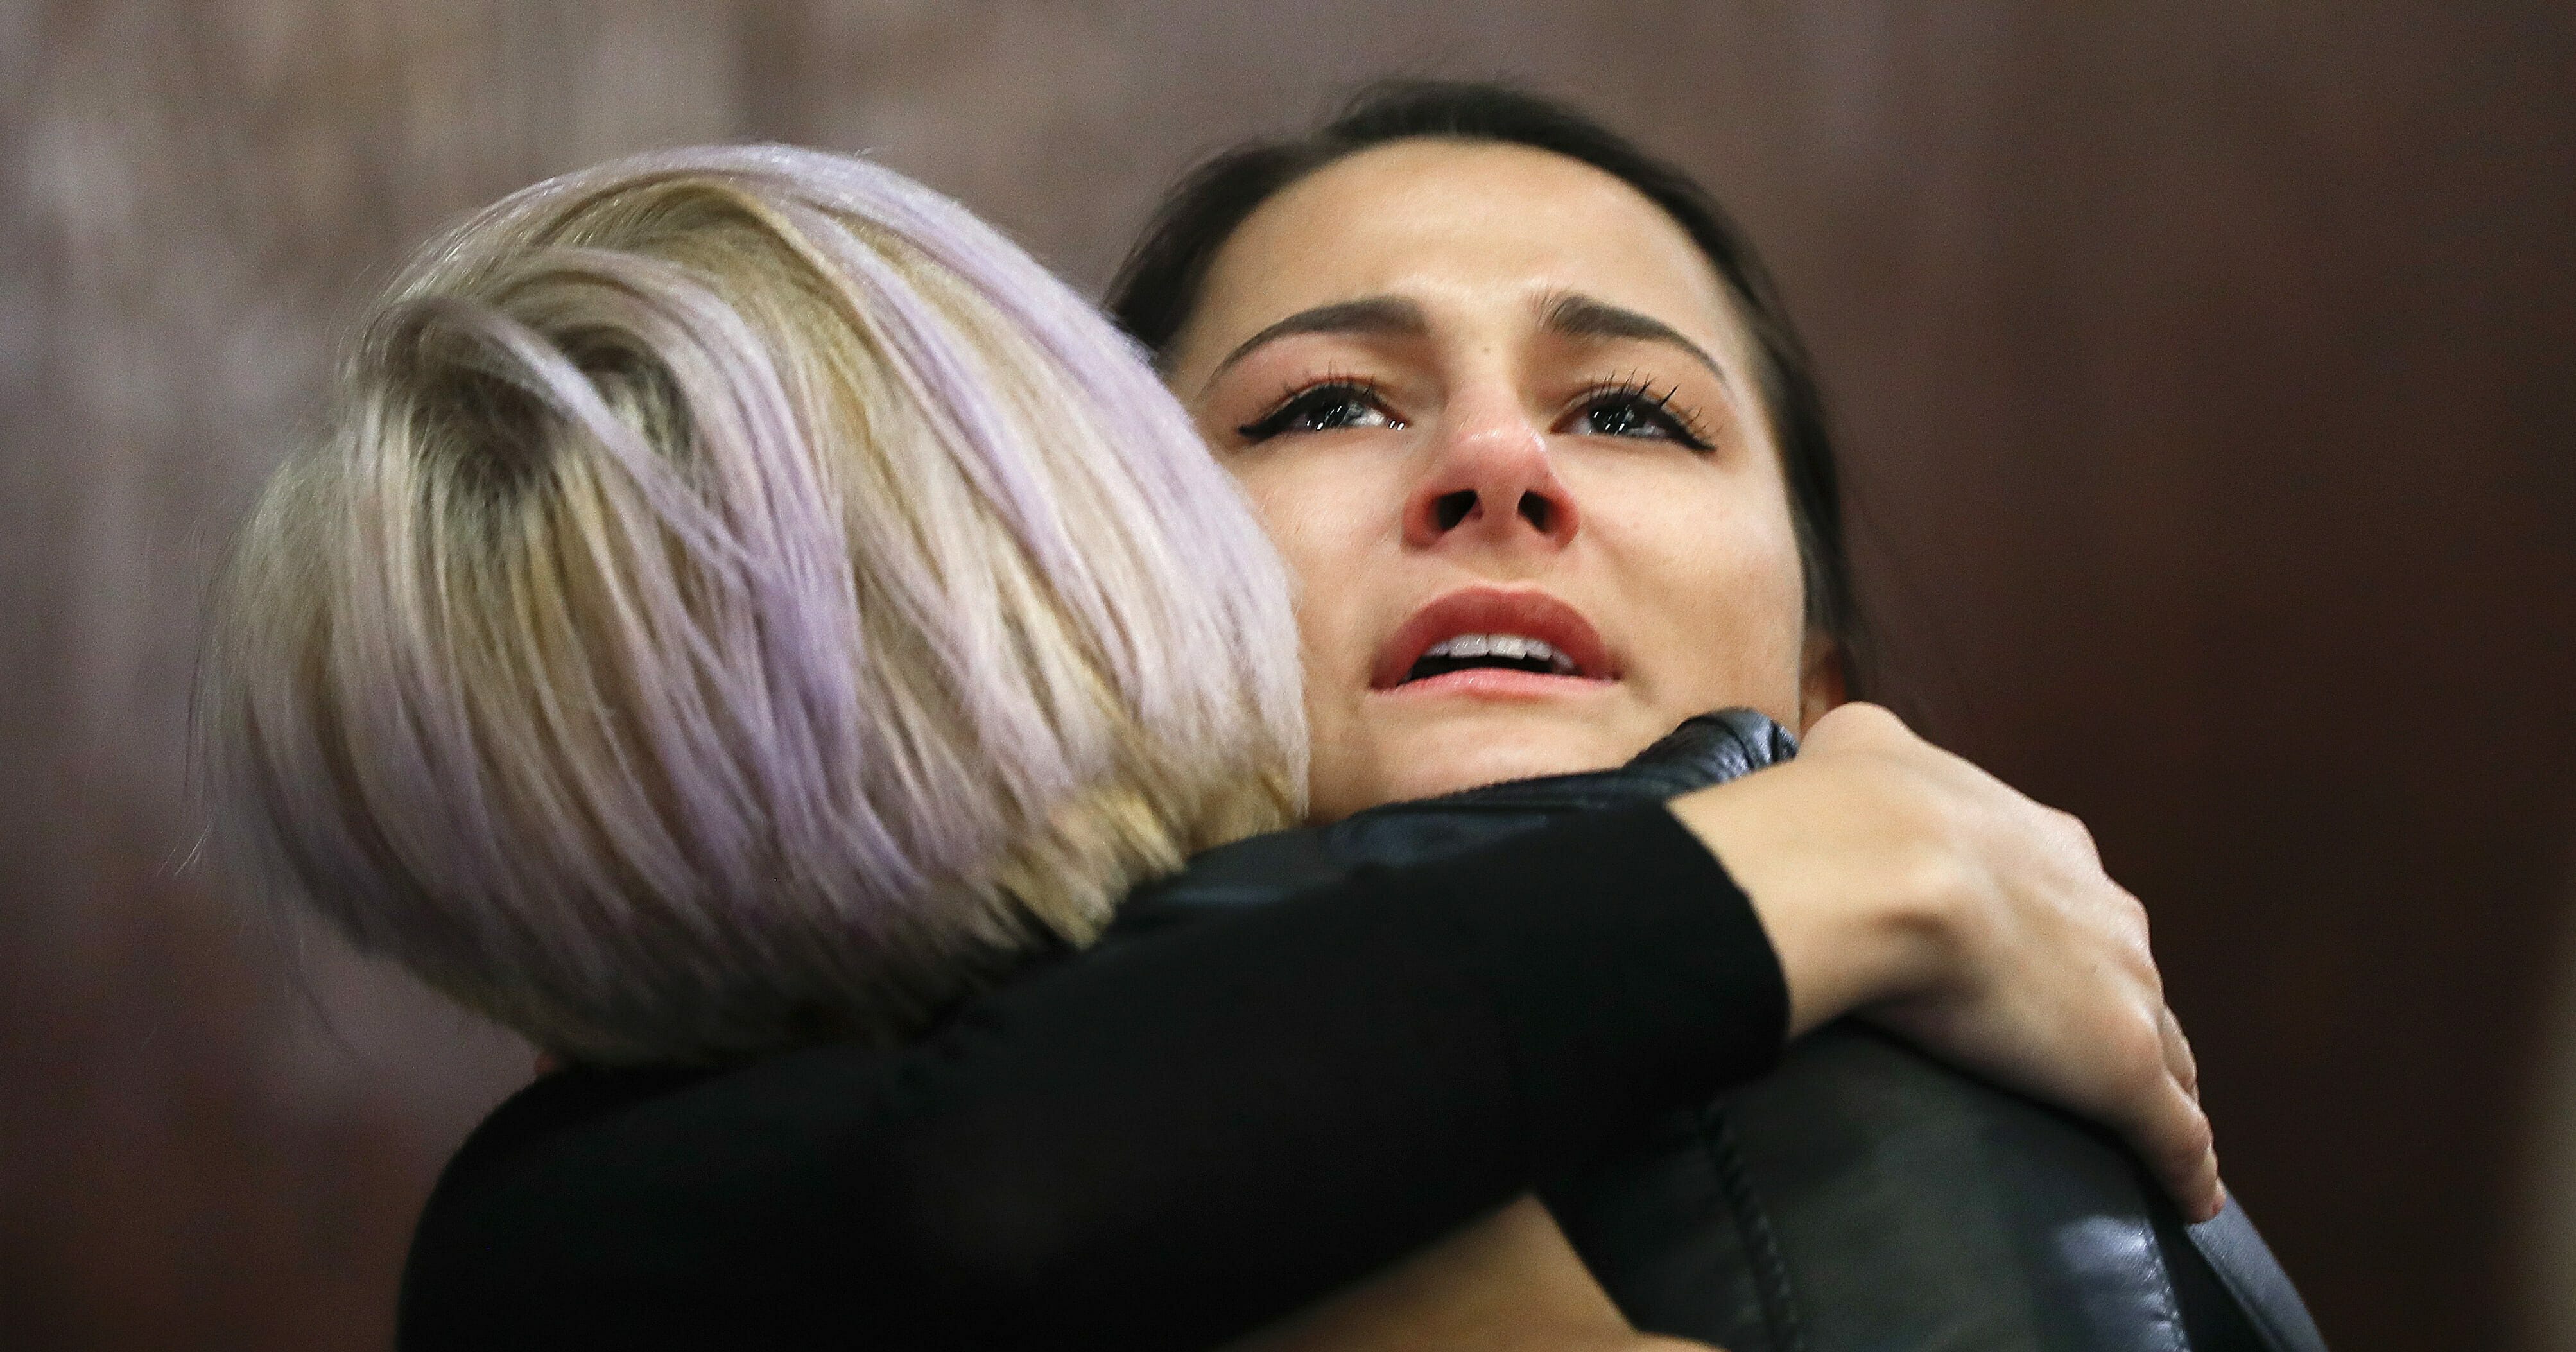 Bailey Kowalski hugs a friend after a news conference in East Lansing, Mich., Thursday, April 11, 2019.